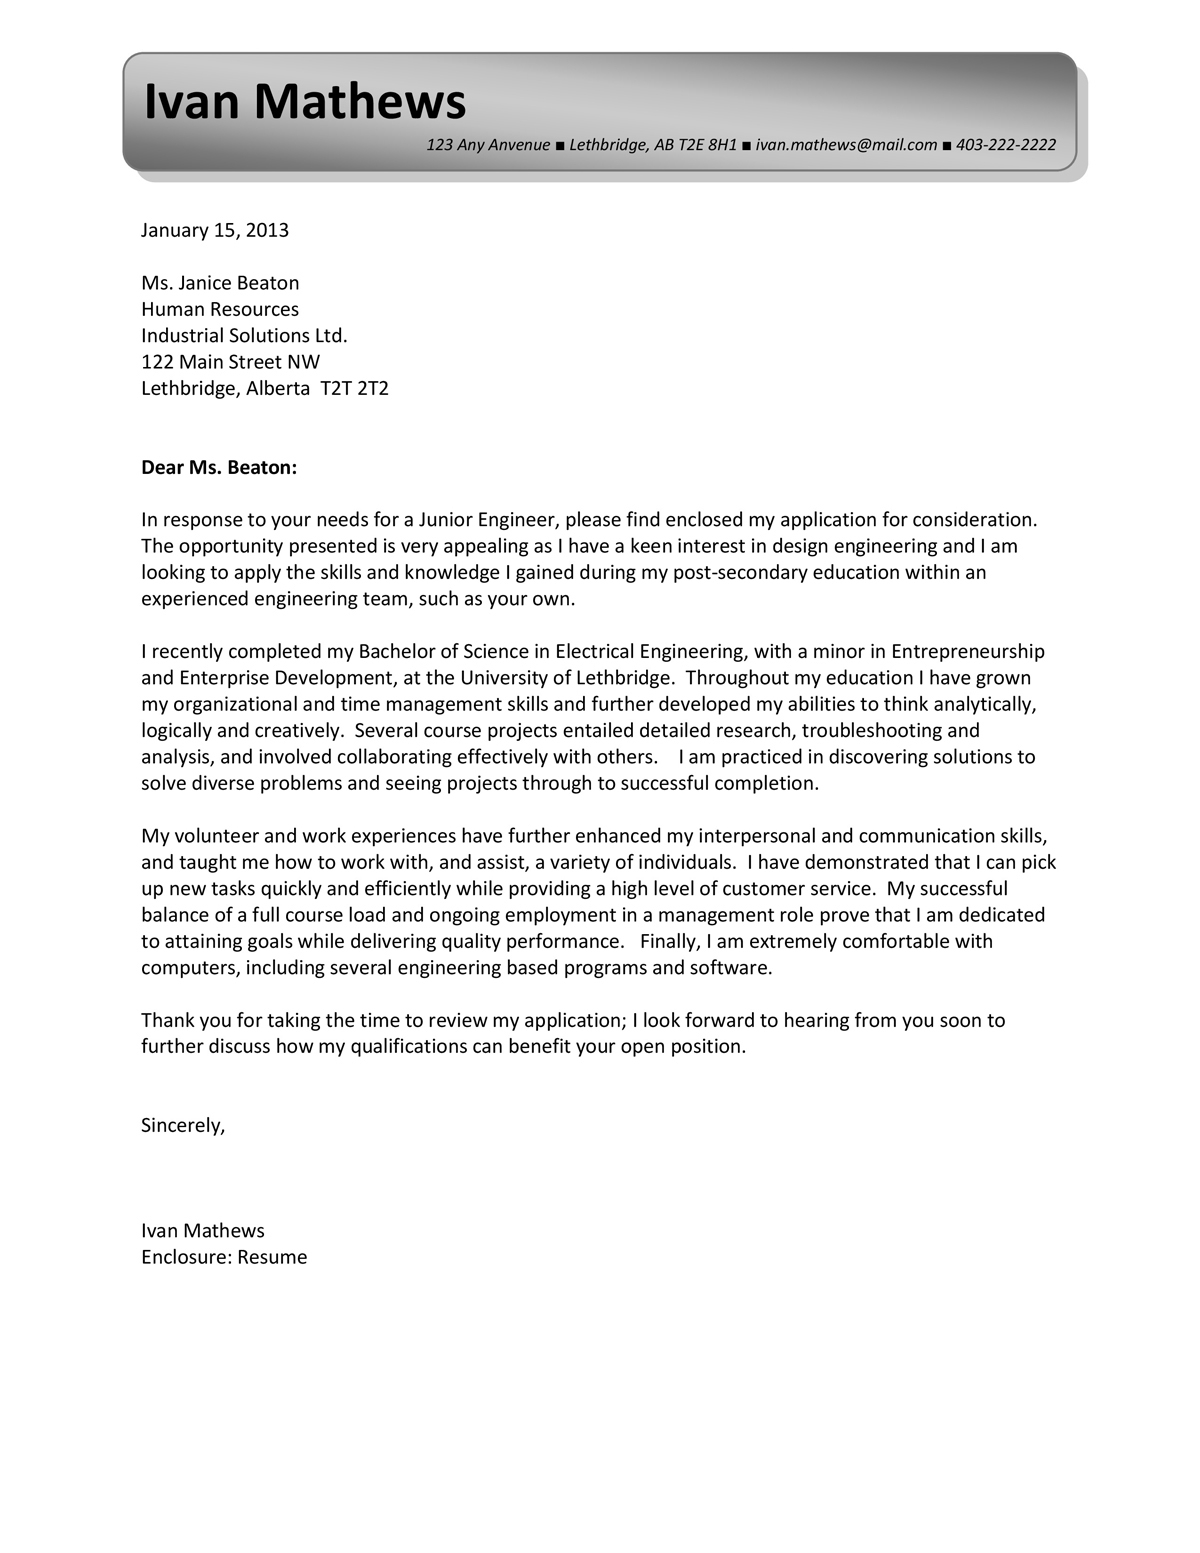 Engineering Entry Level Cover Letter Samples Templates in measurements 1200 X 1553